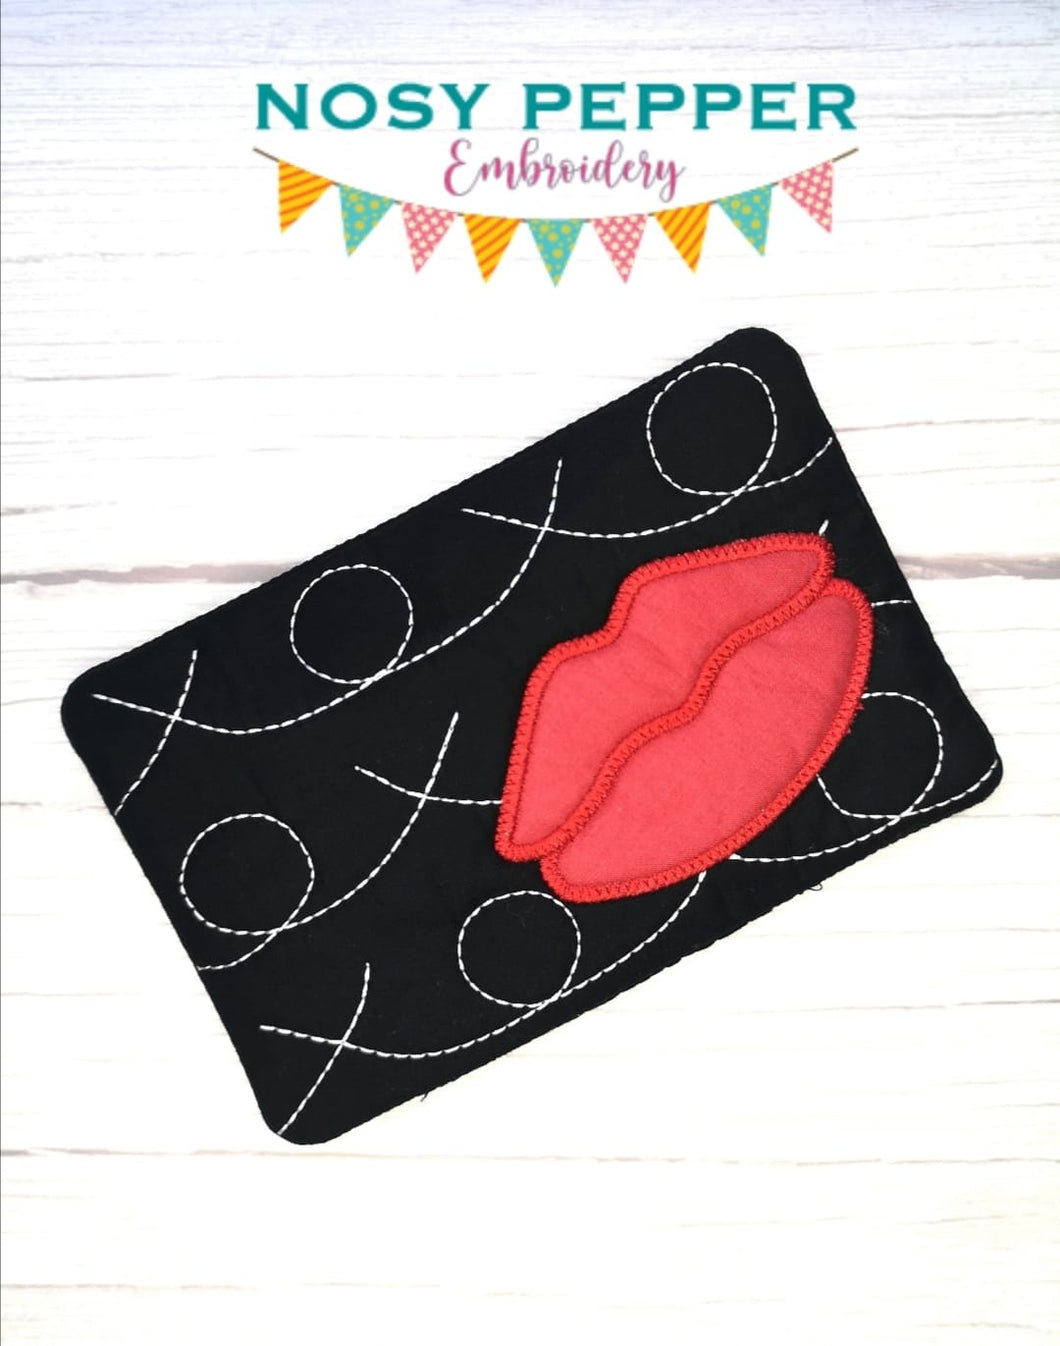 Lips applique quilted mug rug (2 versions & 4 sizes included) machine embroidery design DIGITAL DOWNLOAD